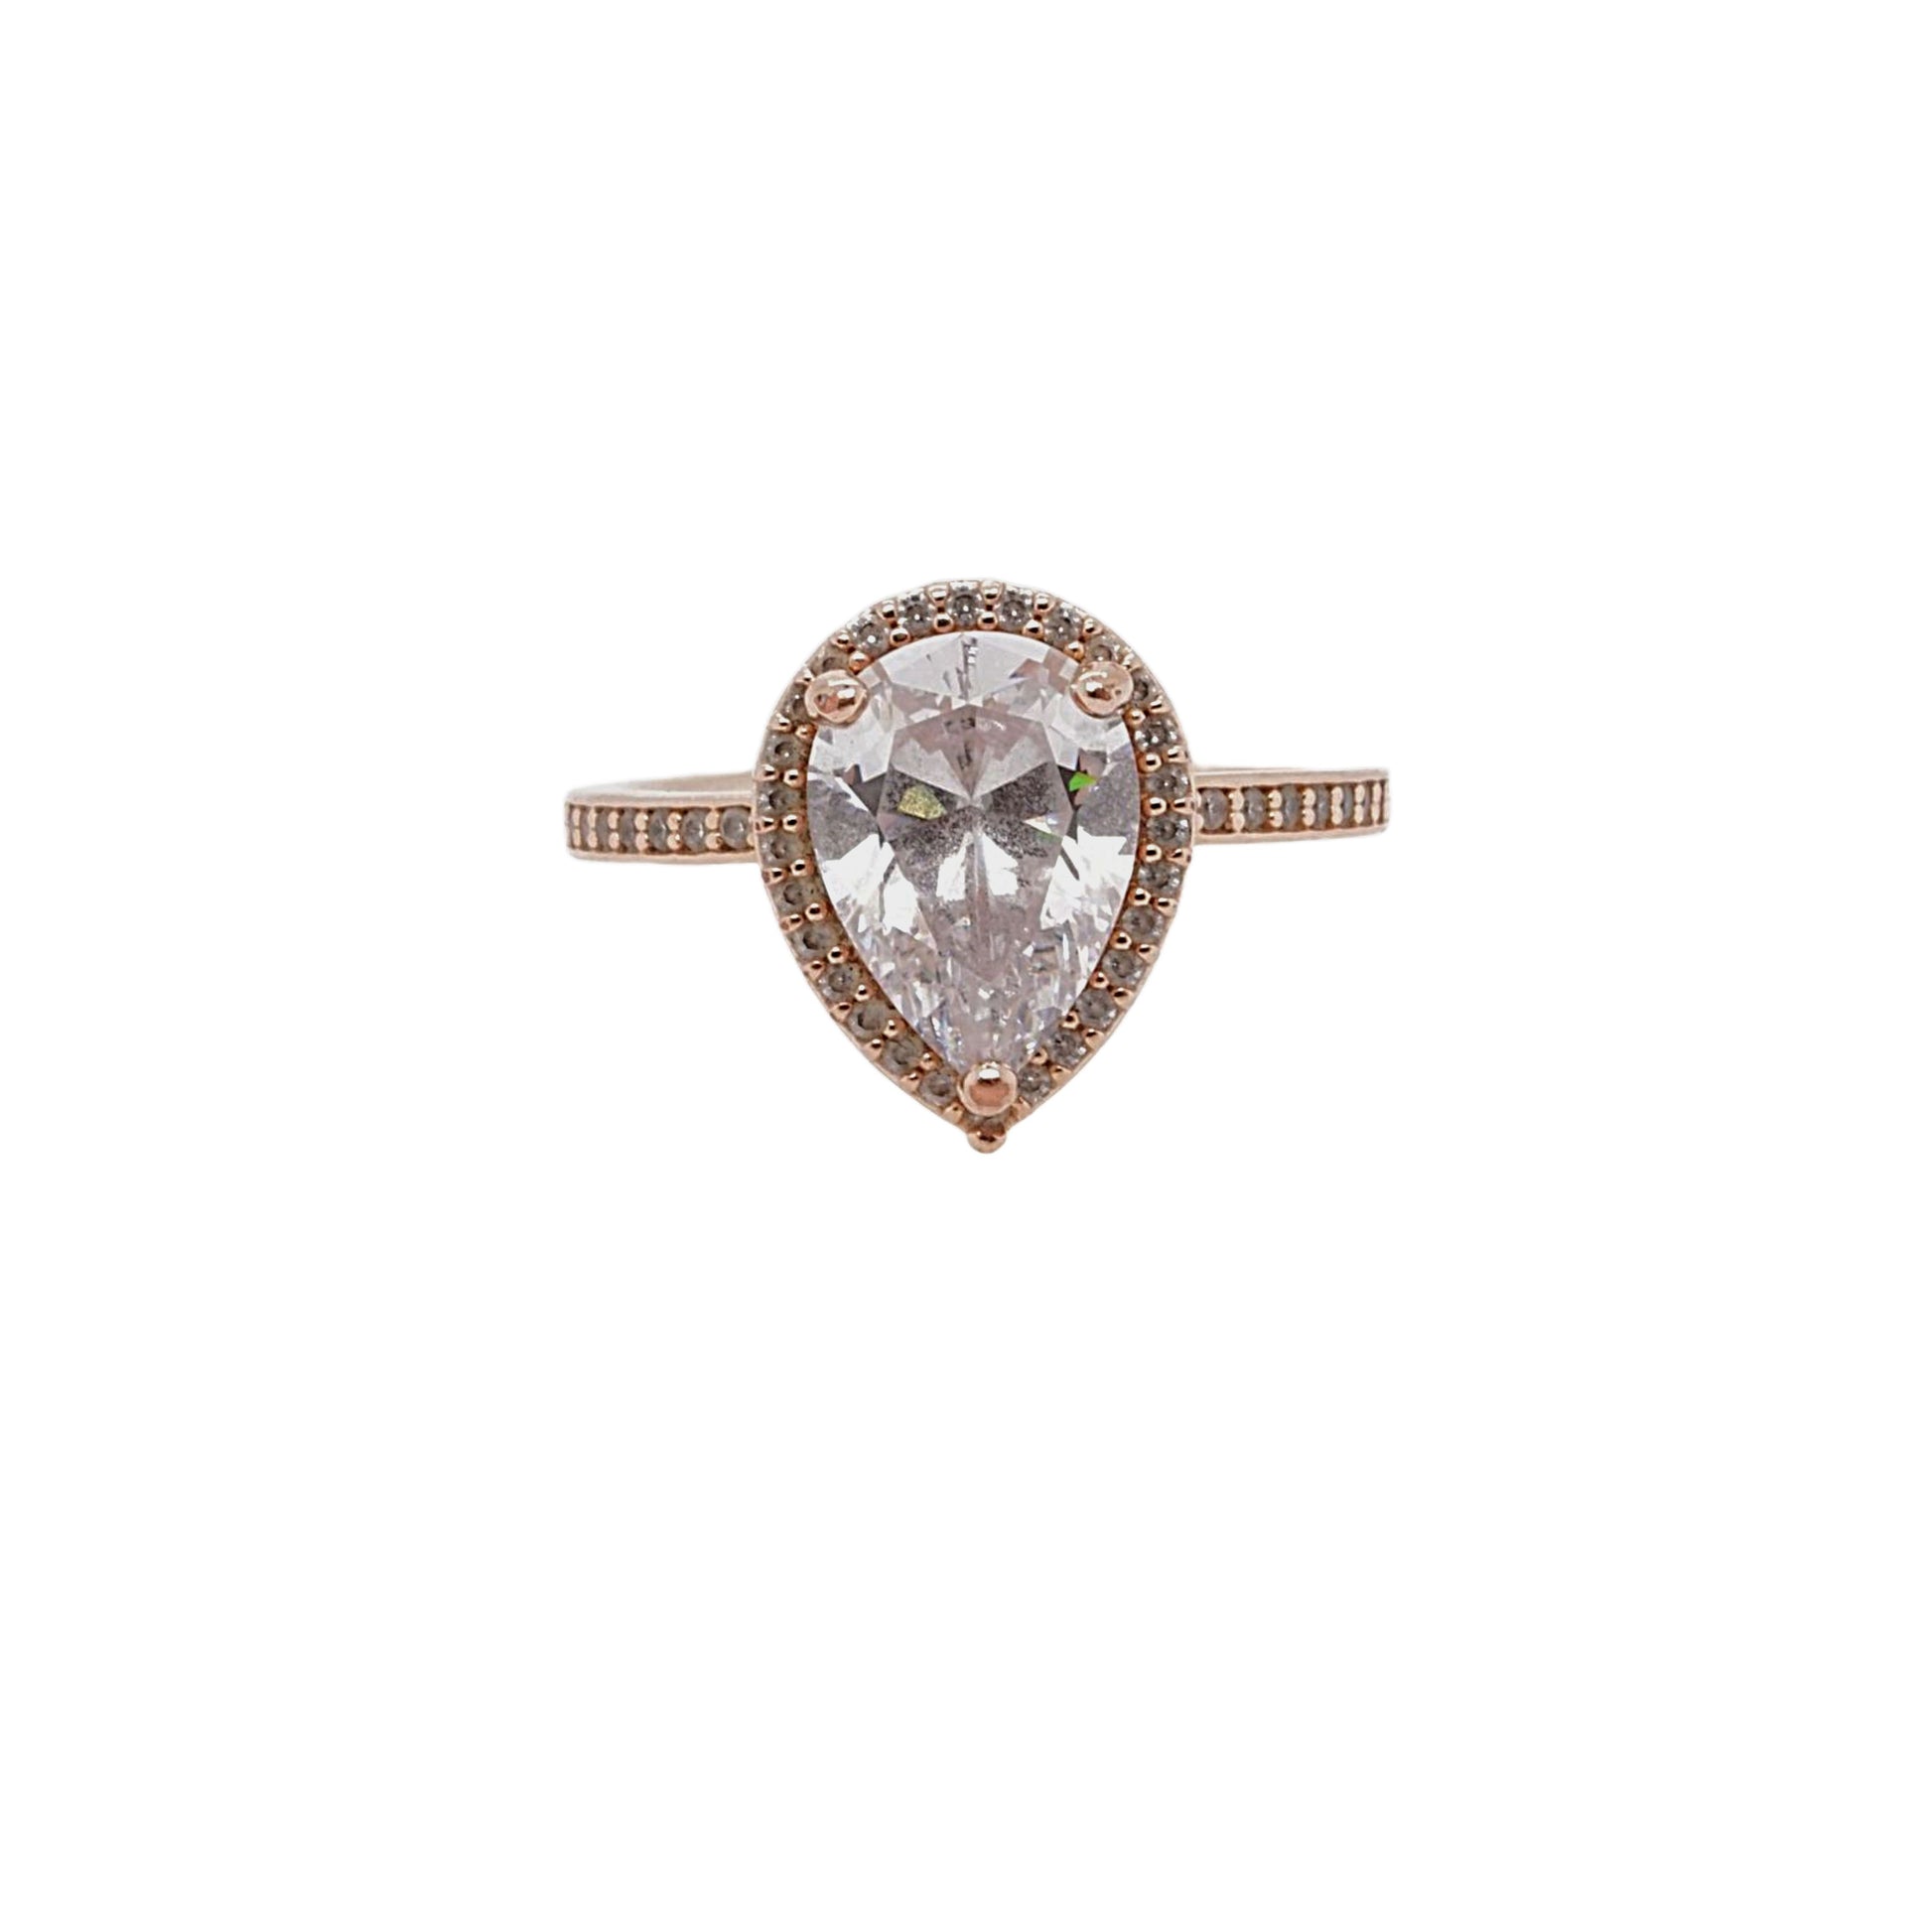 Sparkling Teardrop Halo Ring, Rose gold plated